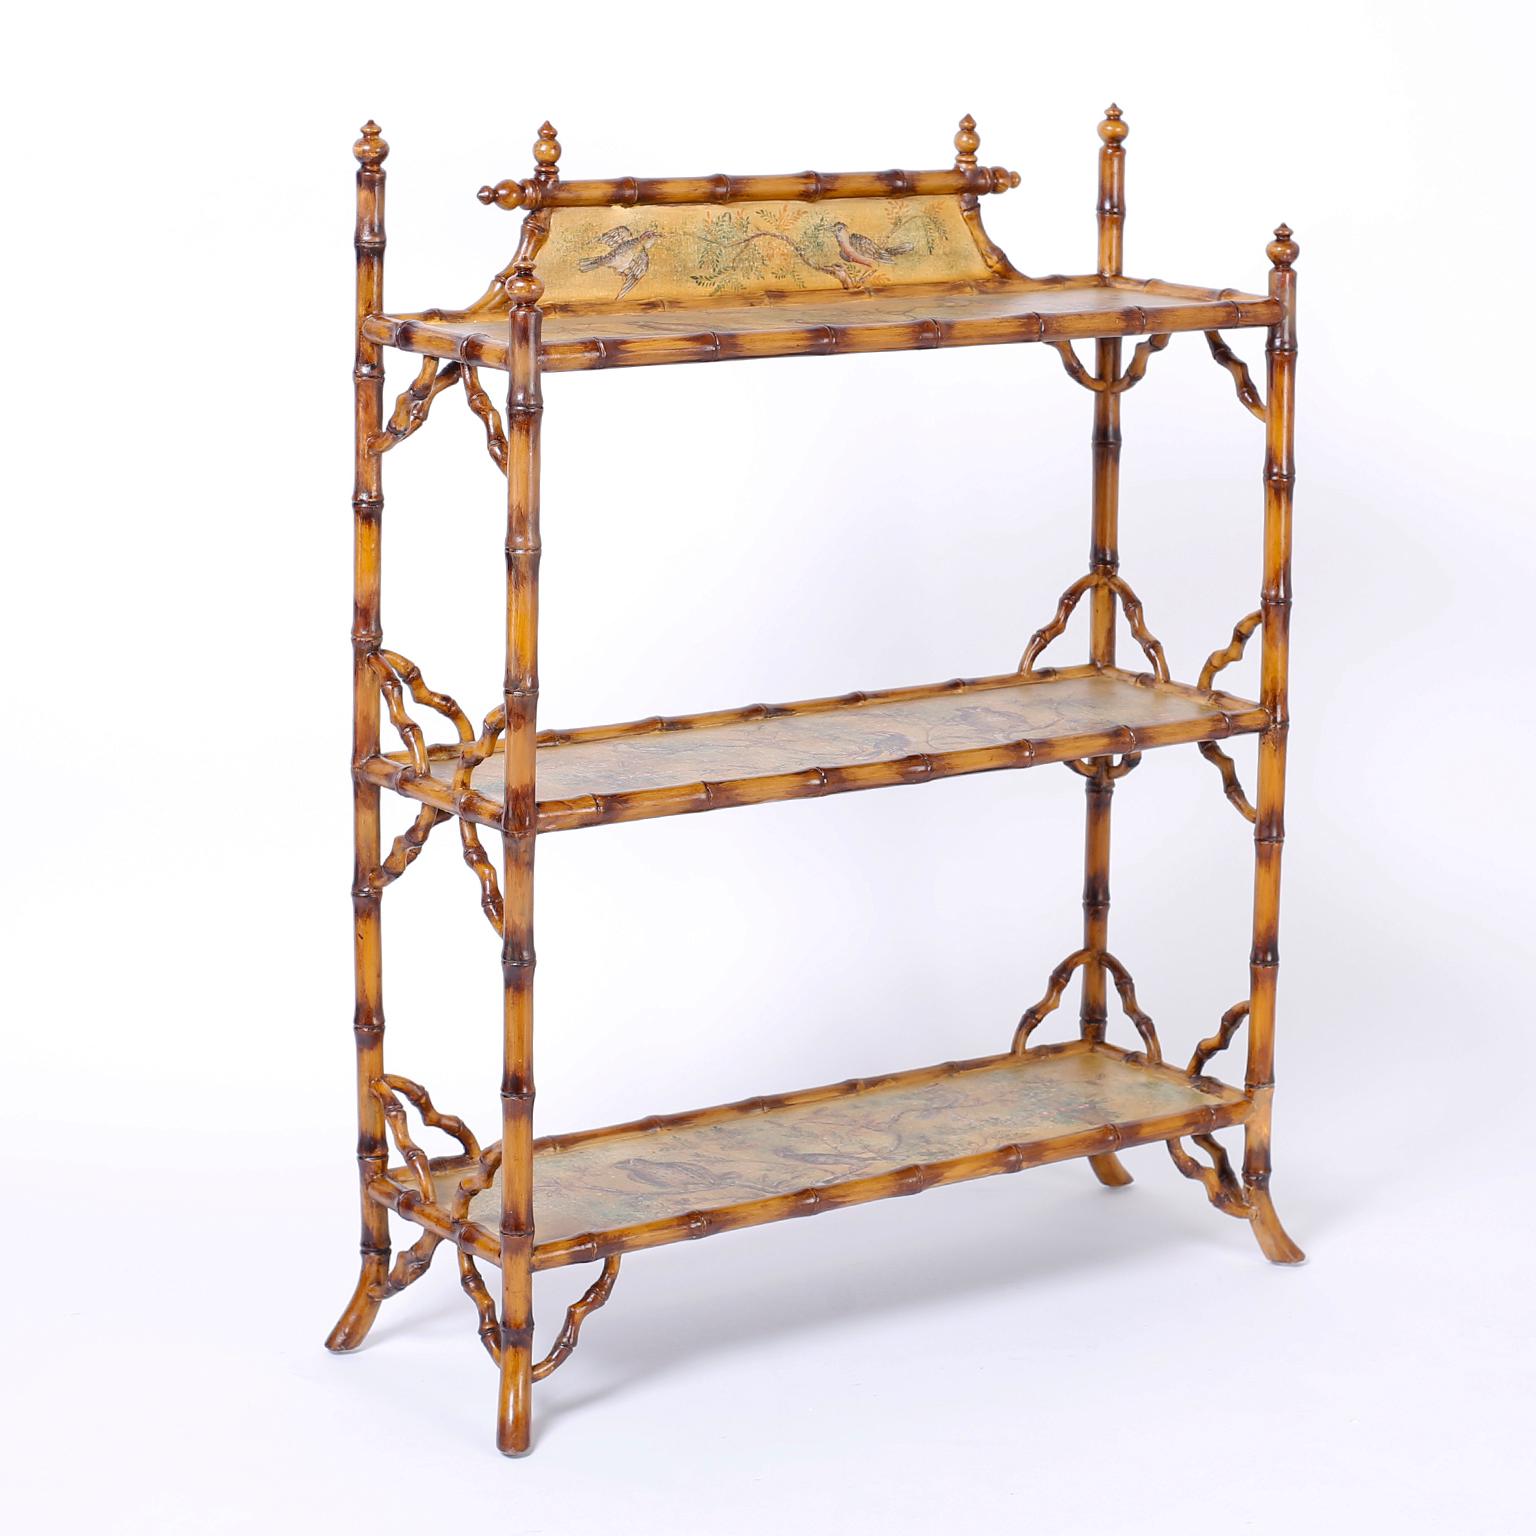 Three-tiered faux bamboo étagère with turned finial and splayed feet. The shelves and backsplash are decorated with decoupage whimsical birds, trees and flowers.